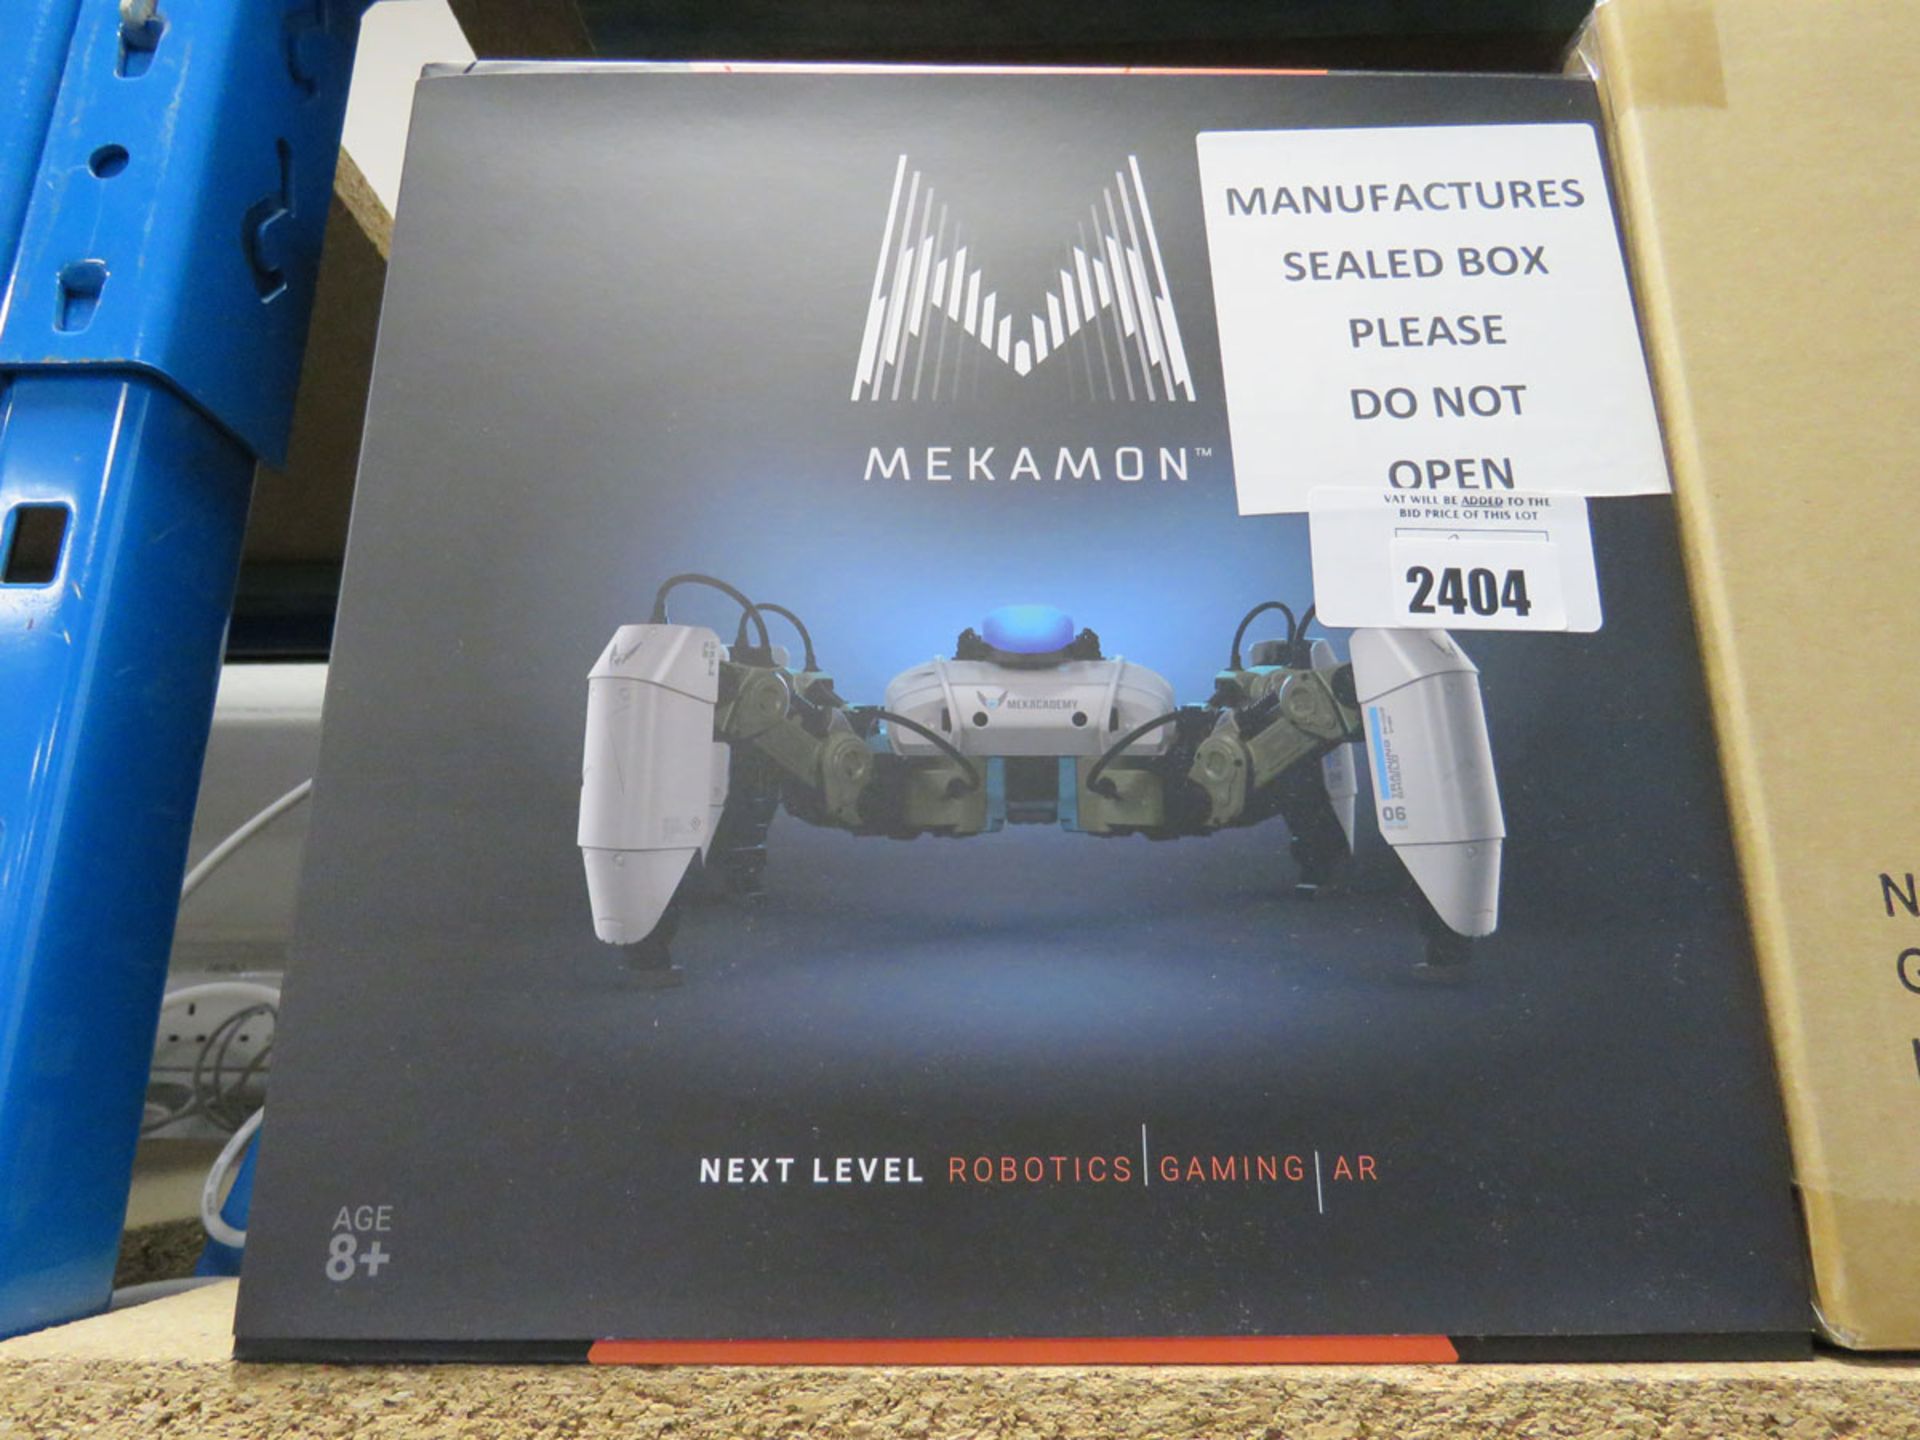 Mecamon gaming AR r/c drone in box